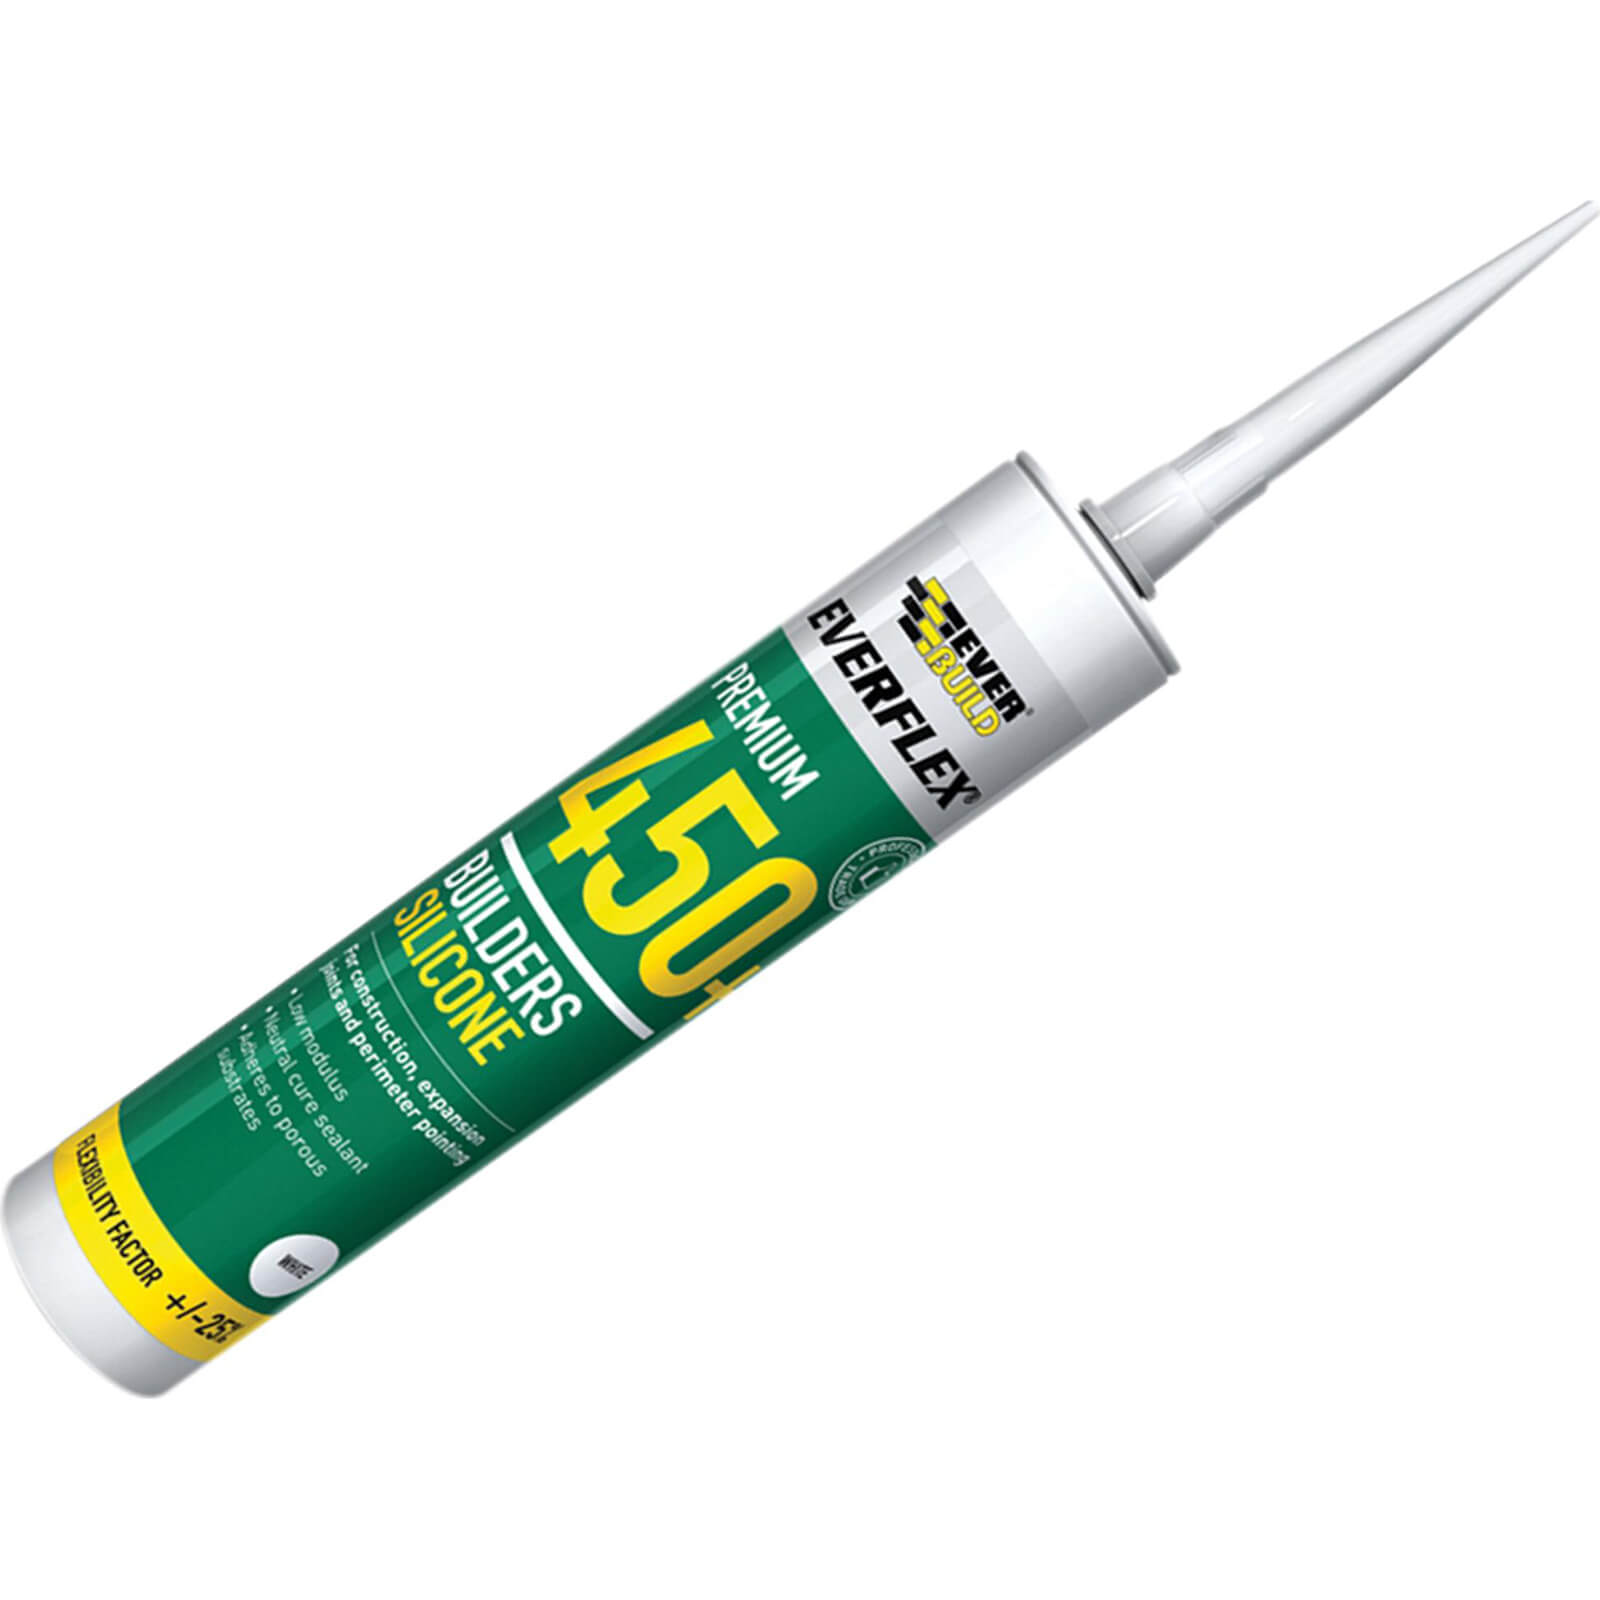 Image of Everbuild Builders Silicone Sealant White 310ml